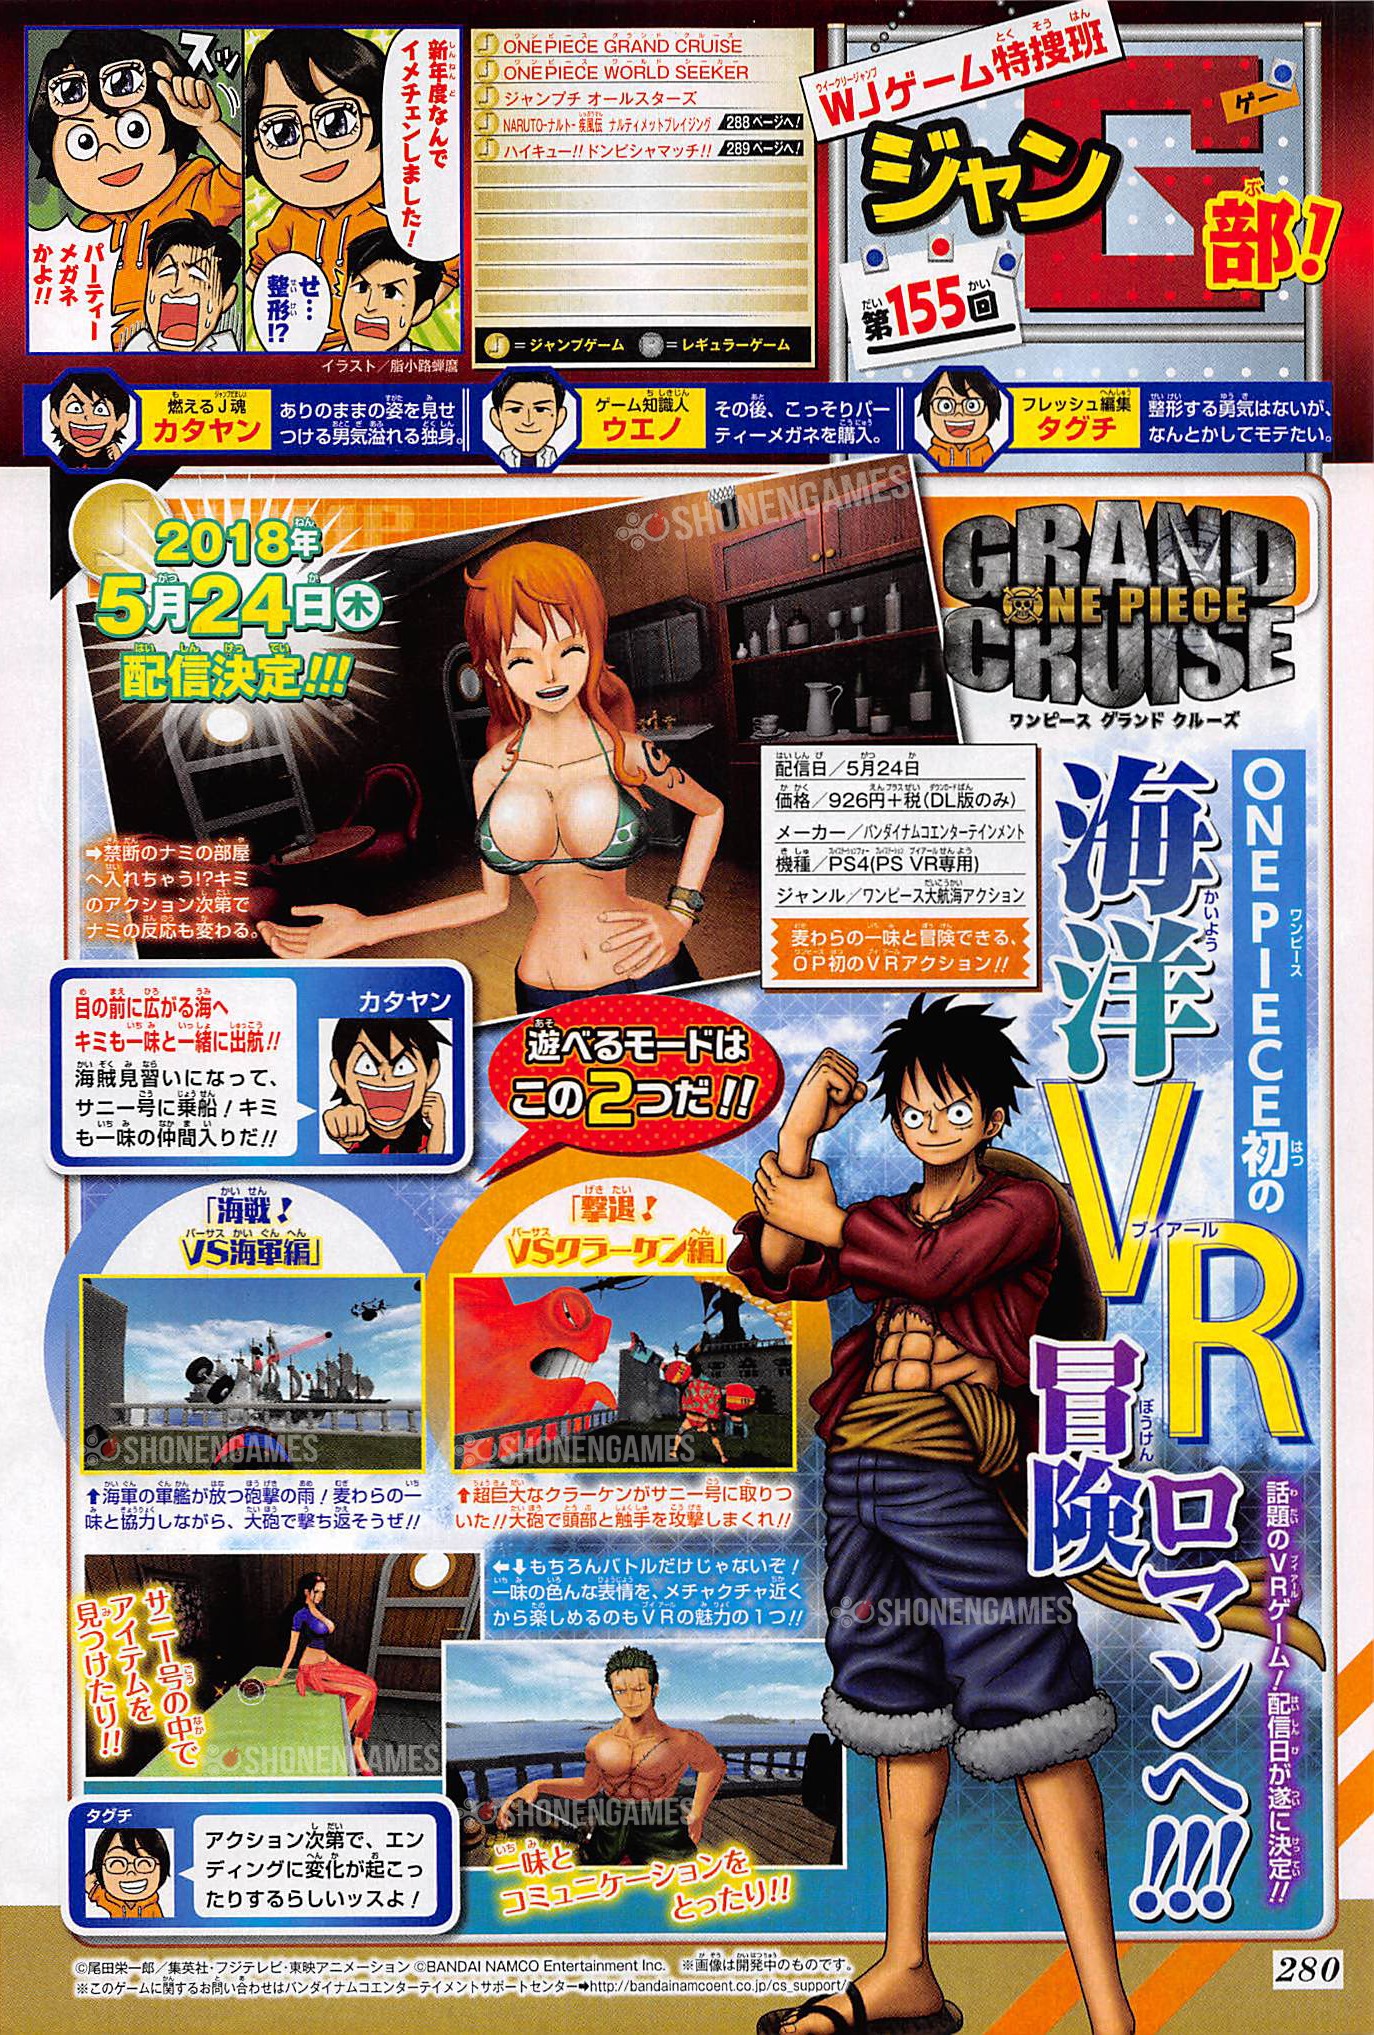 One Piece Grand Cruise Sets Sail In Japan On May 24 For Playstation Vr Siliconera